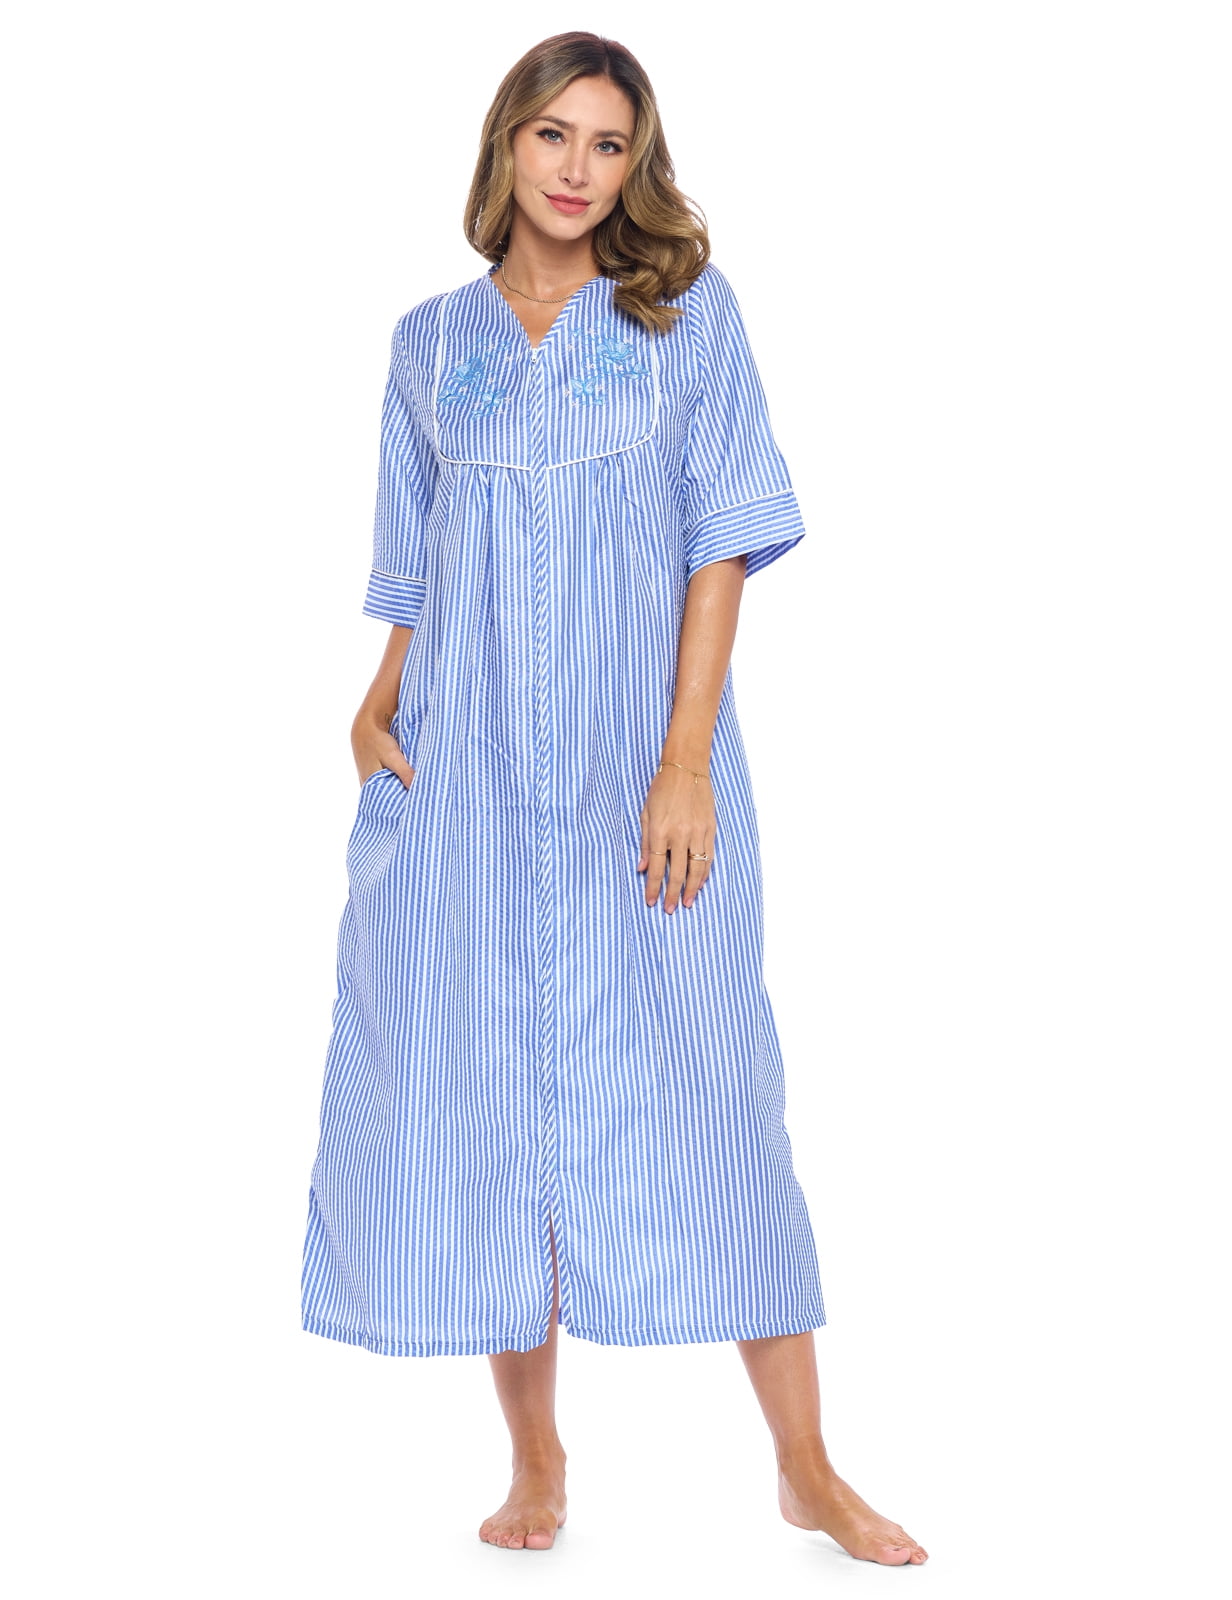 3/4 Sleeves Housecoat Long Duster Lounger Casual Nights Women's Zip Front Woven House Dress 